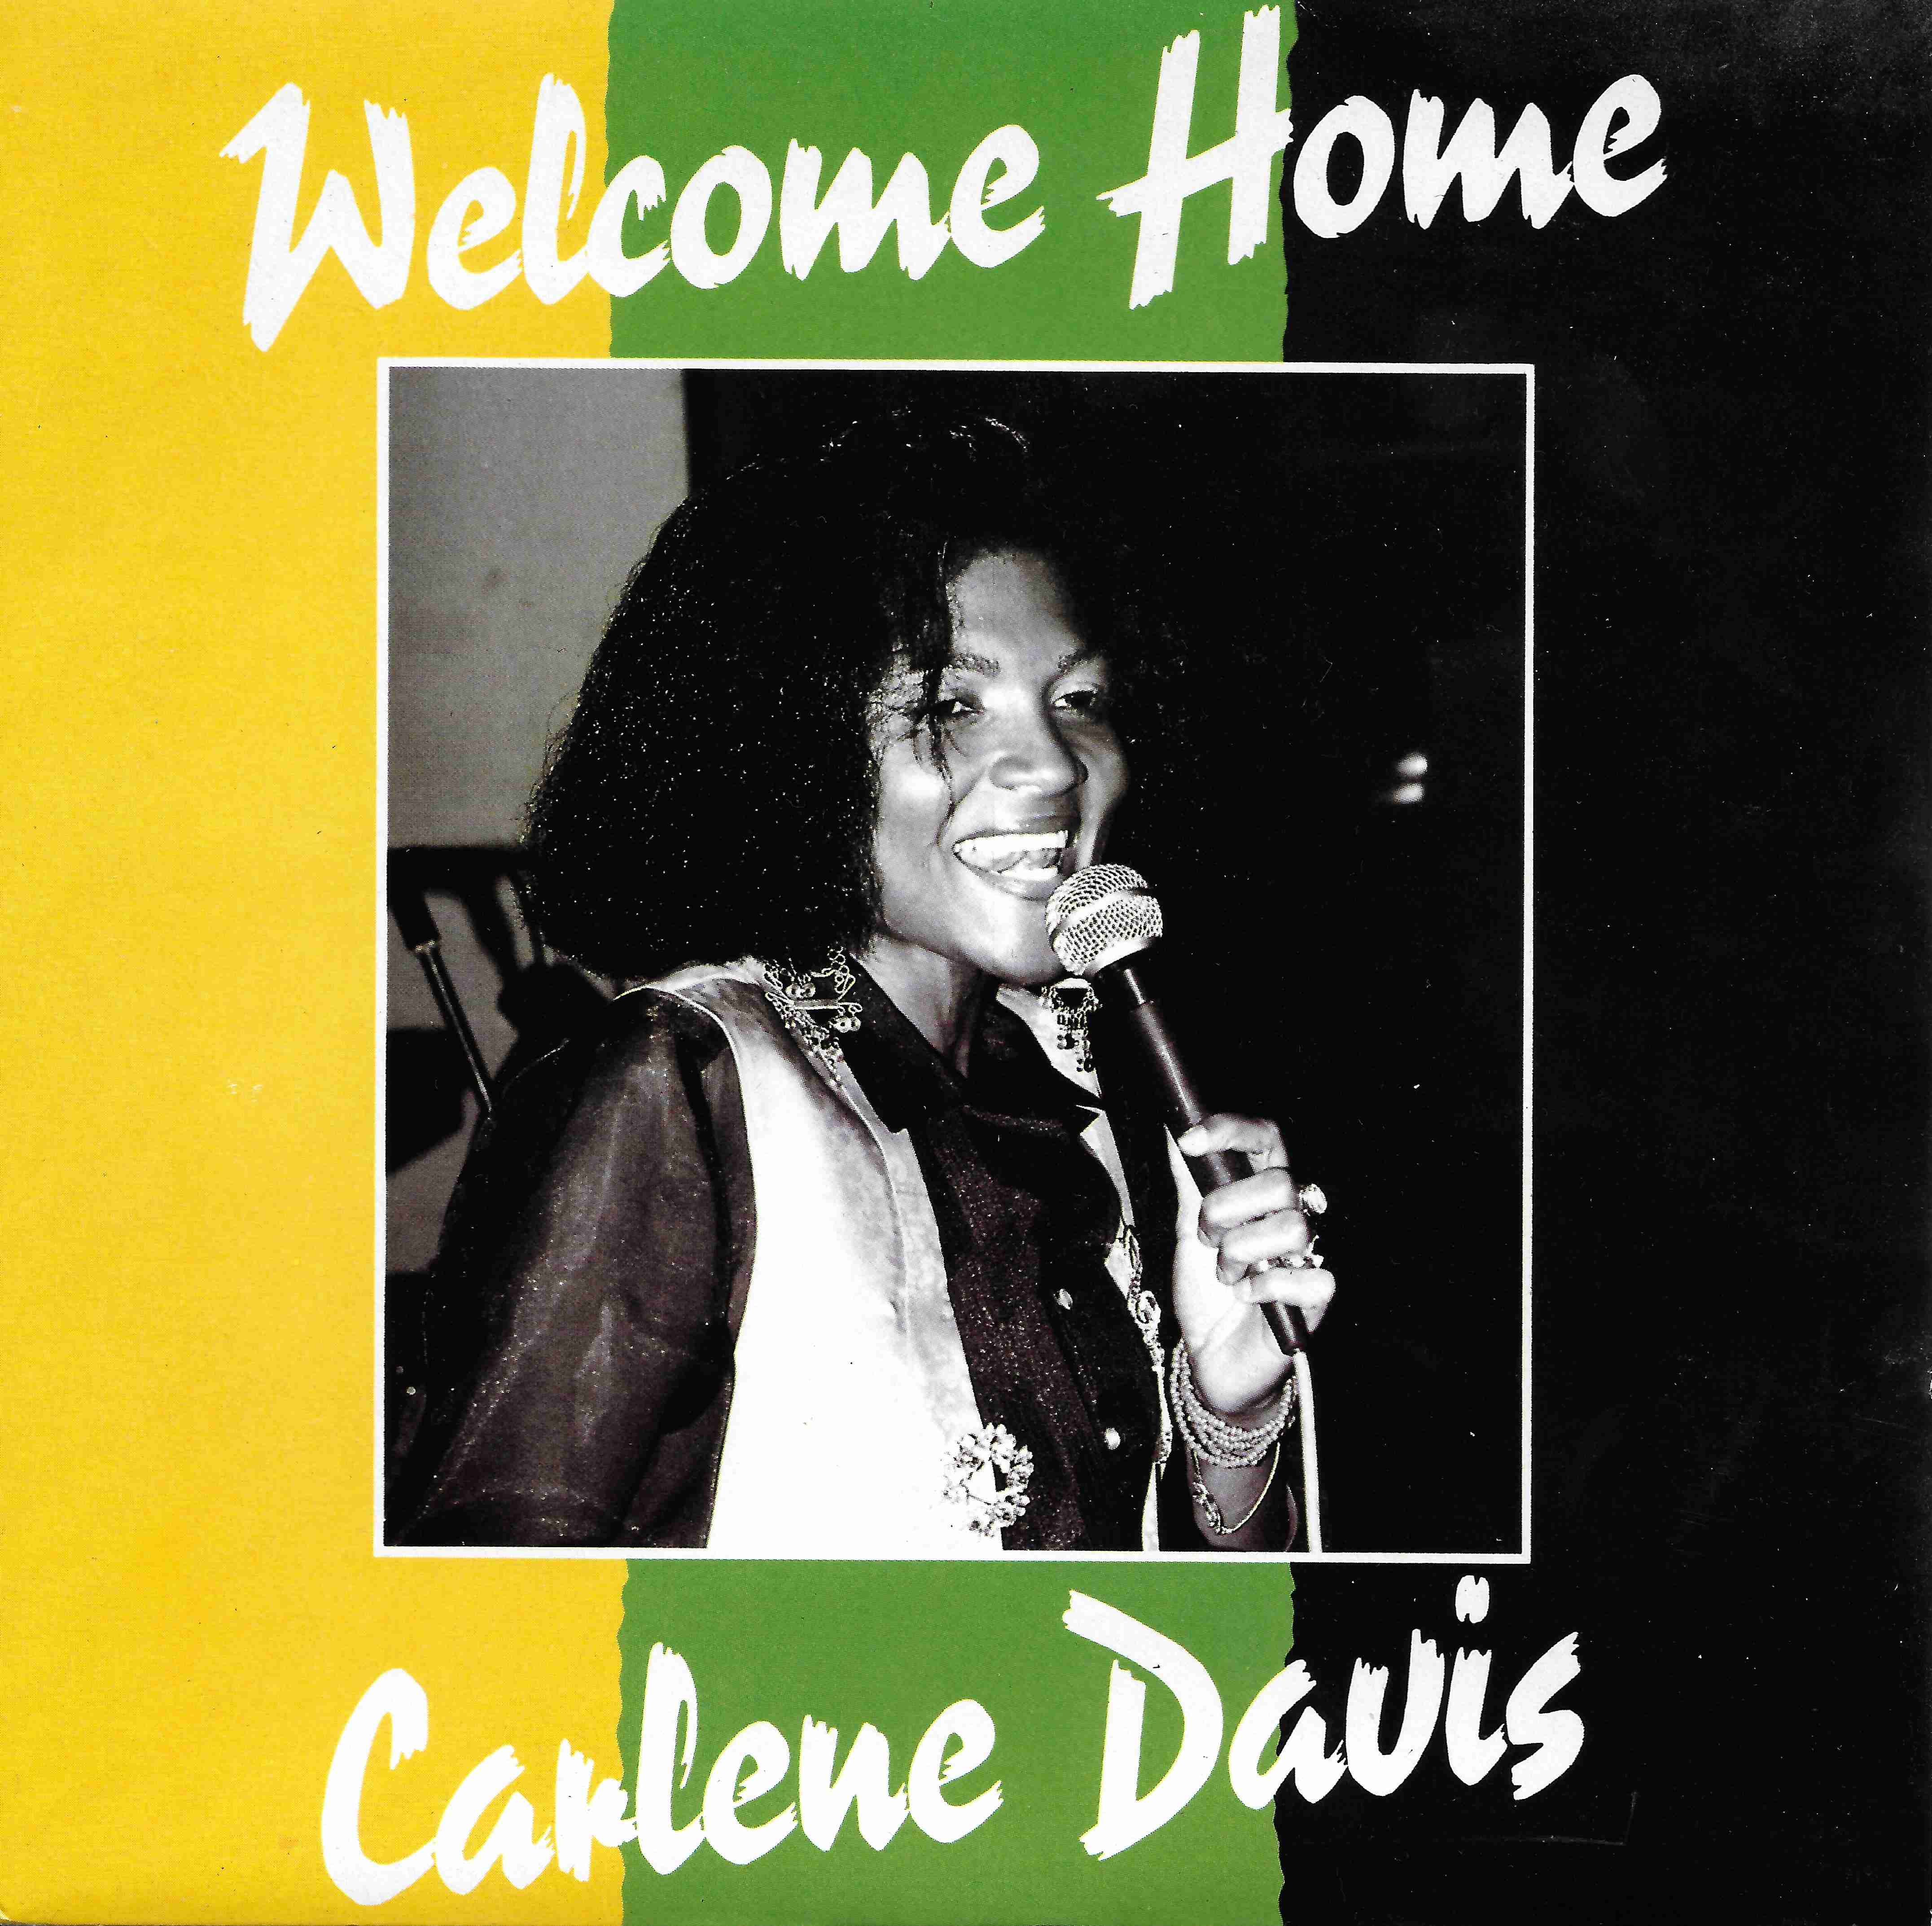 Picture of RESL 244 Welcome home by artist Carlene Davis from the BBC records and Tapes library